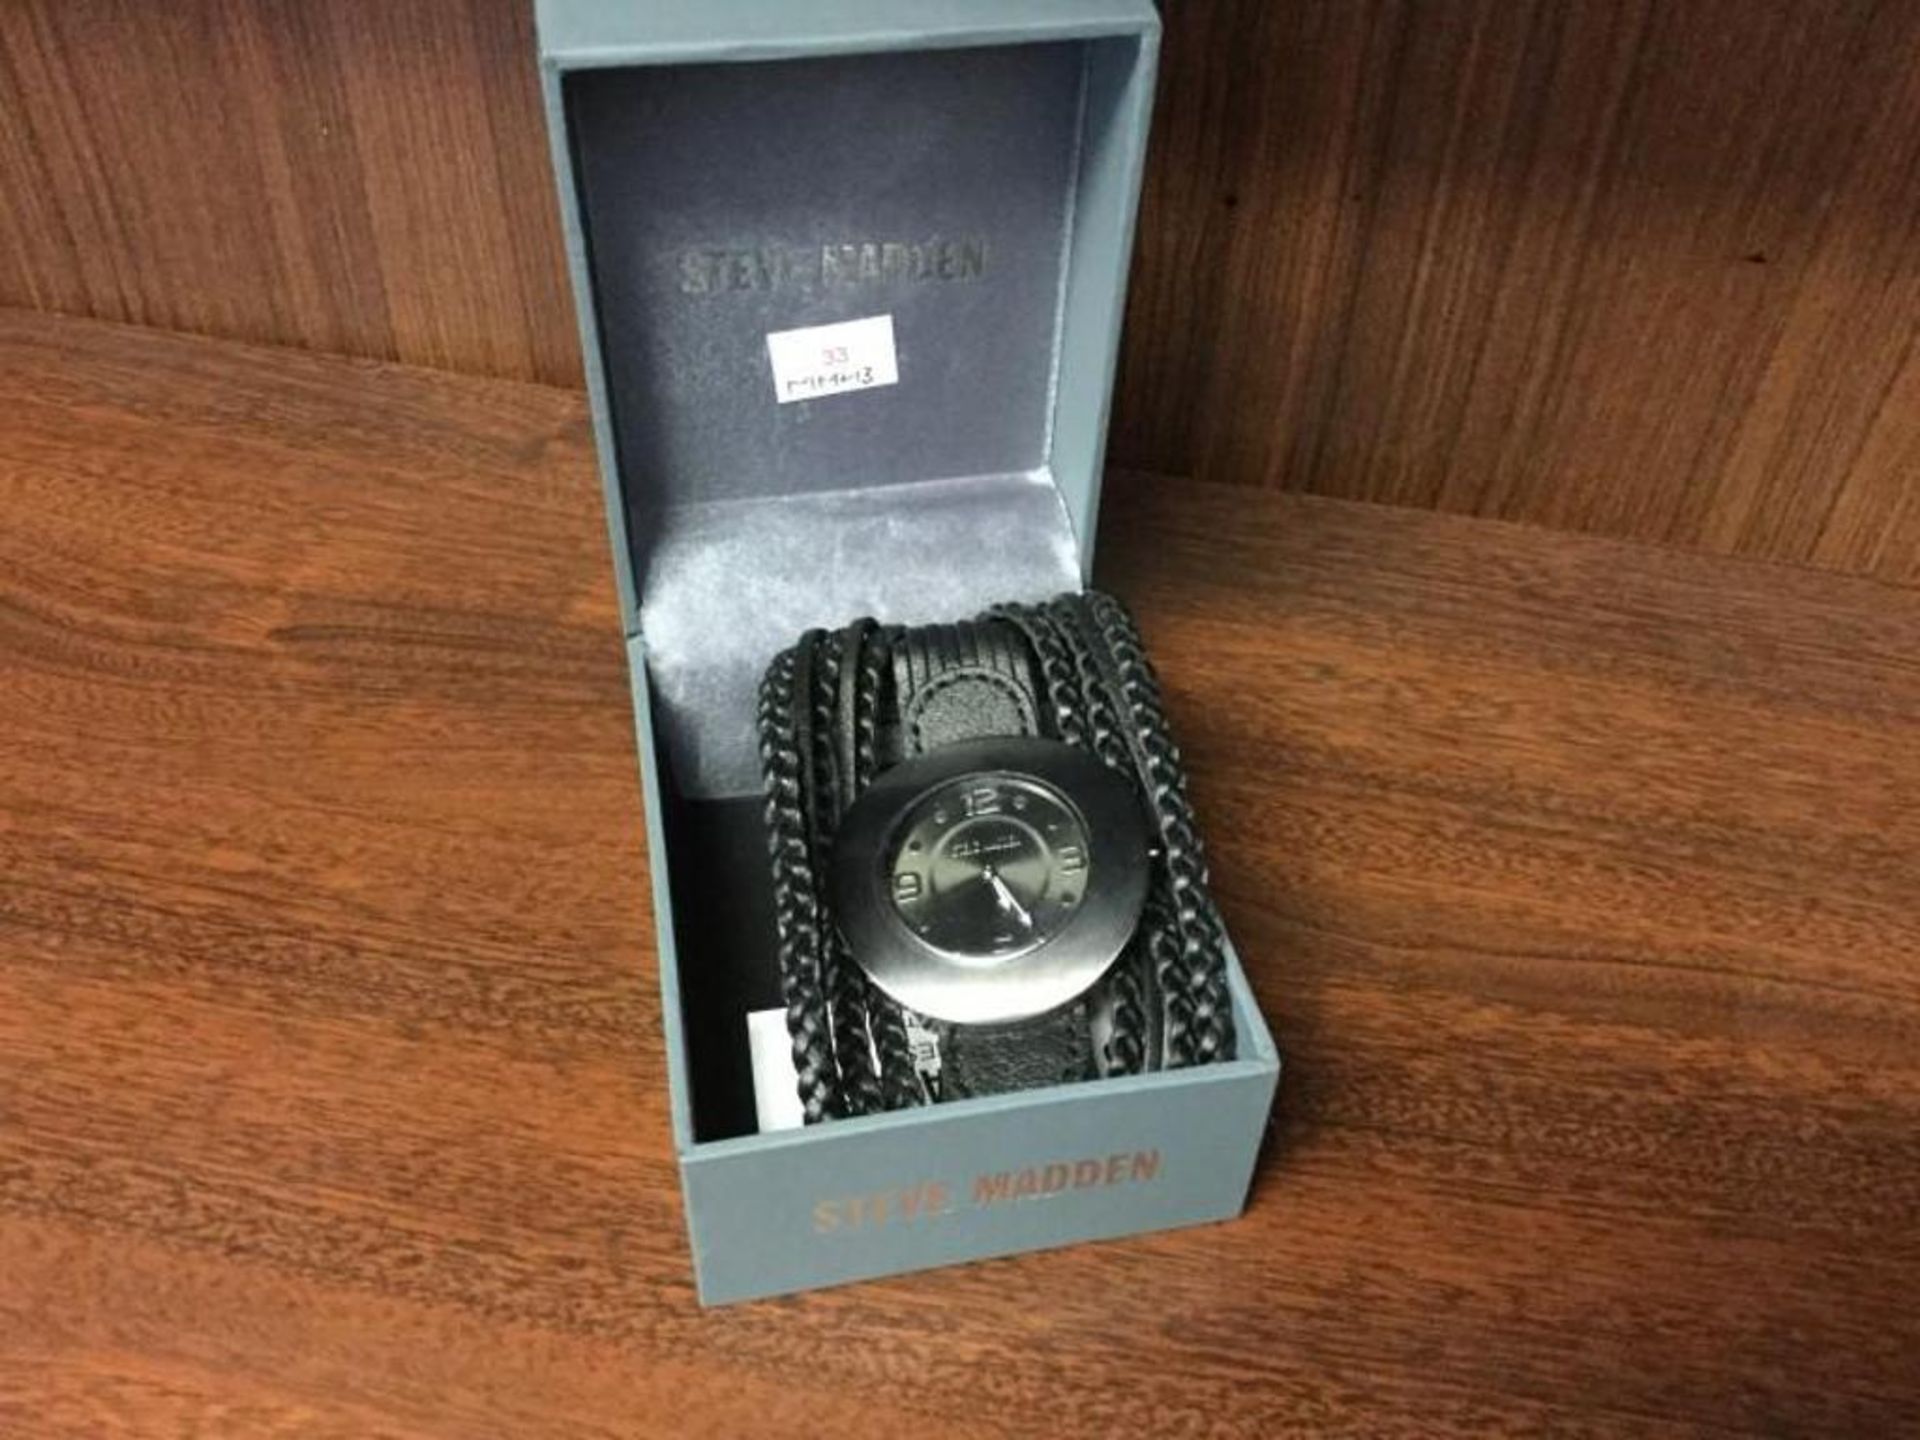 Steve Madden Watch - Black fave with Leather bands